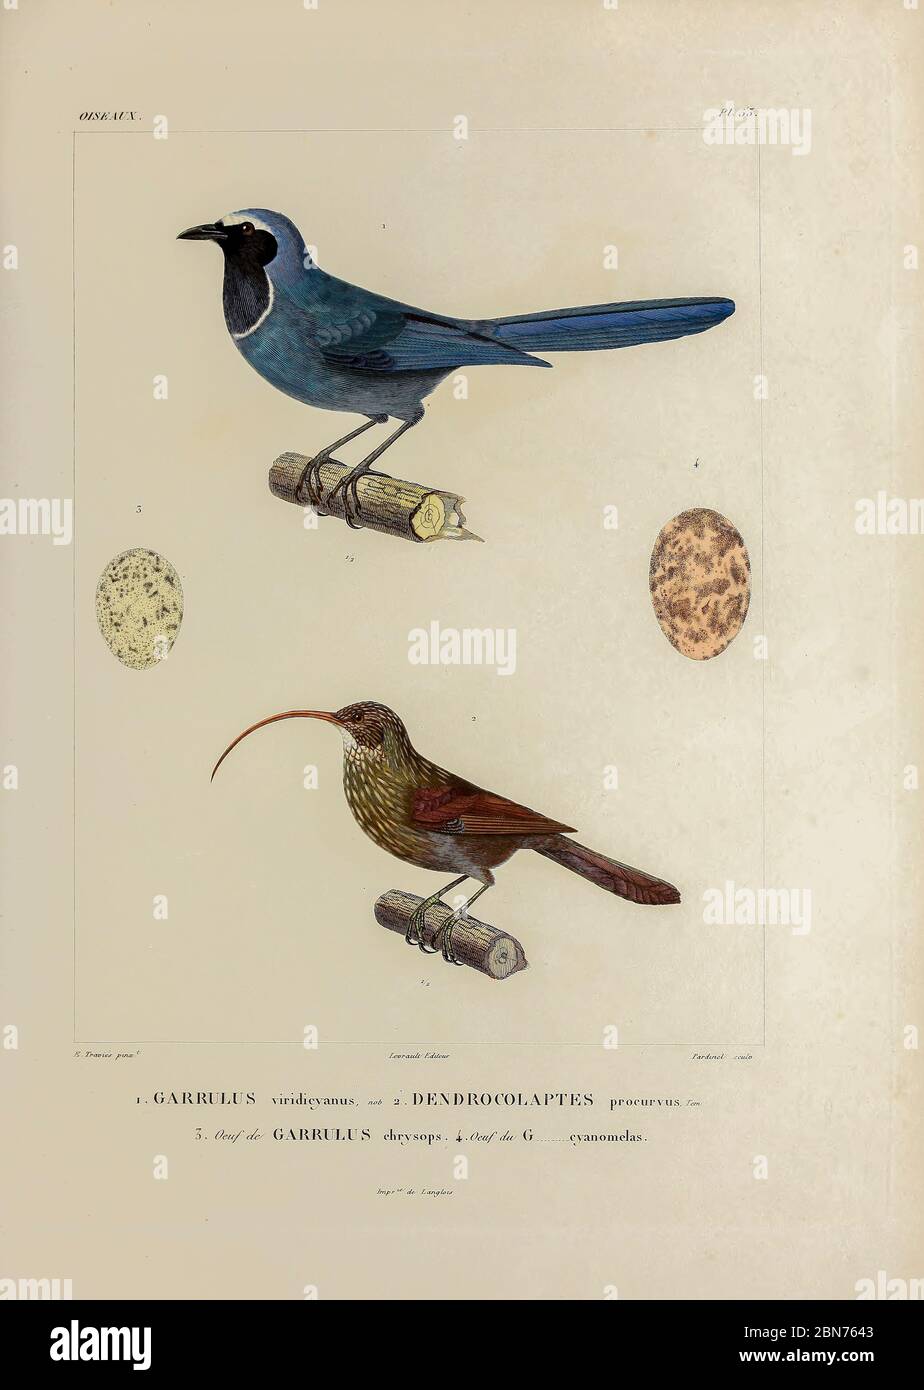 hand coloured sketch Top: white-collared jay (Cyanolyca viridicyanus [Here as Garrulus viridicyanus]) Bottom: red-billed scythebill (Campylorhamphus trochilirostris) [Here as dendrocolaptes procurvus]) From the book 'Voyage dans l'Amérique Méridionale' [Journey to South America: (Brazil, the eastern republic of Uruguay, the Argentine Republic, Patagonia, the republic of Chile, the republic of Bolivia, the republic of Peru), executed during the years 1826 - 1833] 4th volume Part 3 By: Orbigny, Alcide Dessalines d', d'Orbigny, 1802-1857; Montagne, Jean François Camille, 1784-1866; Martius, Karl Stock Photo